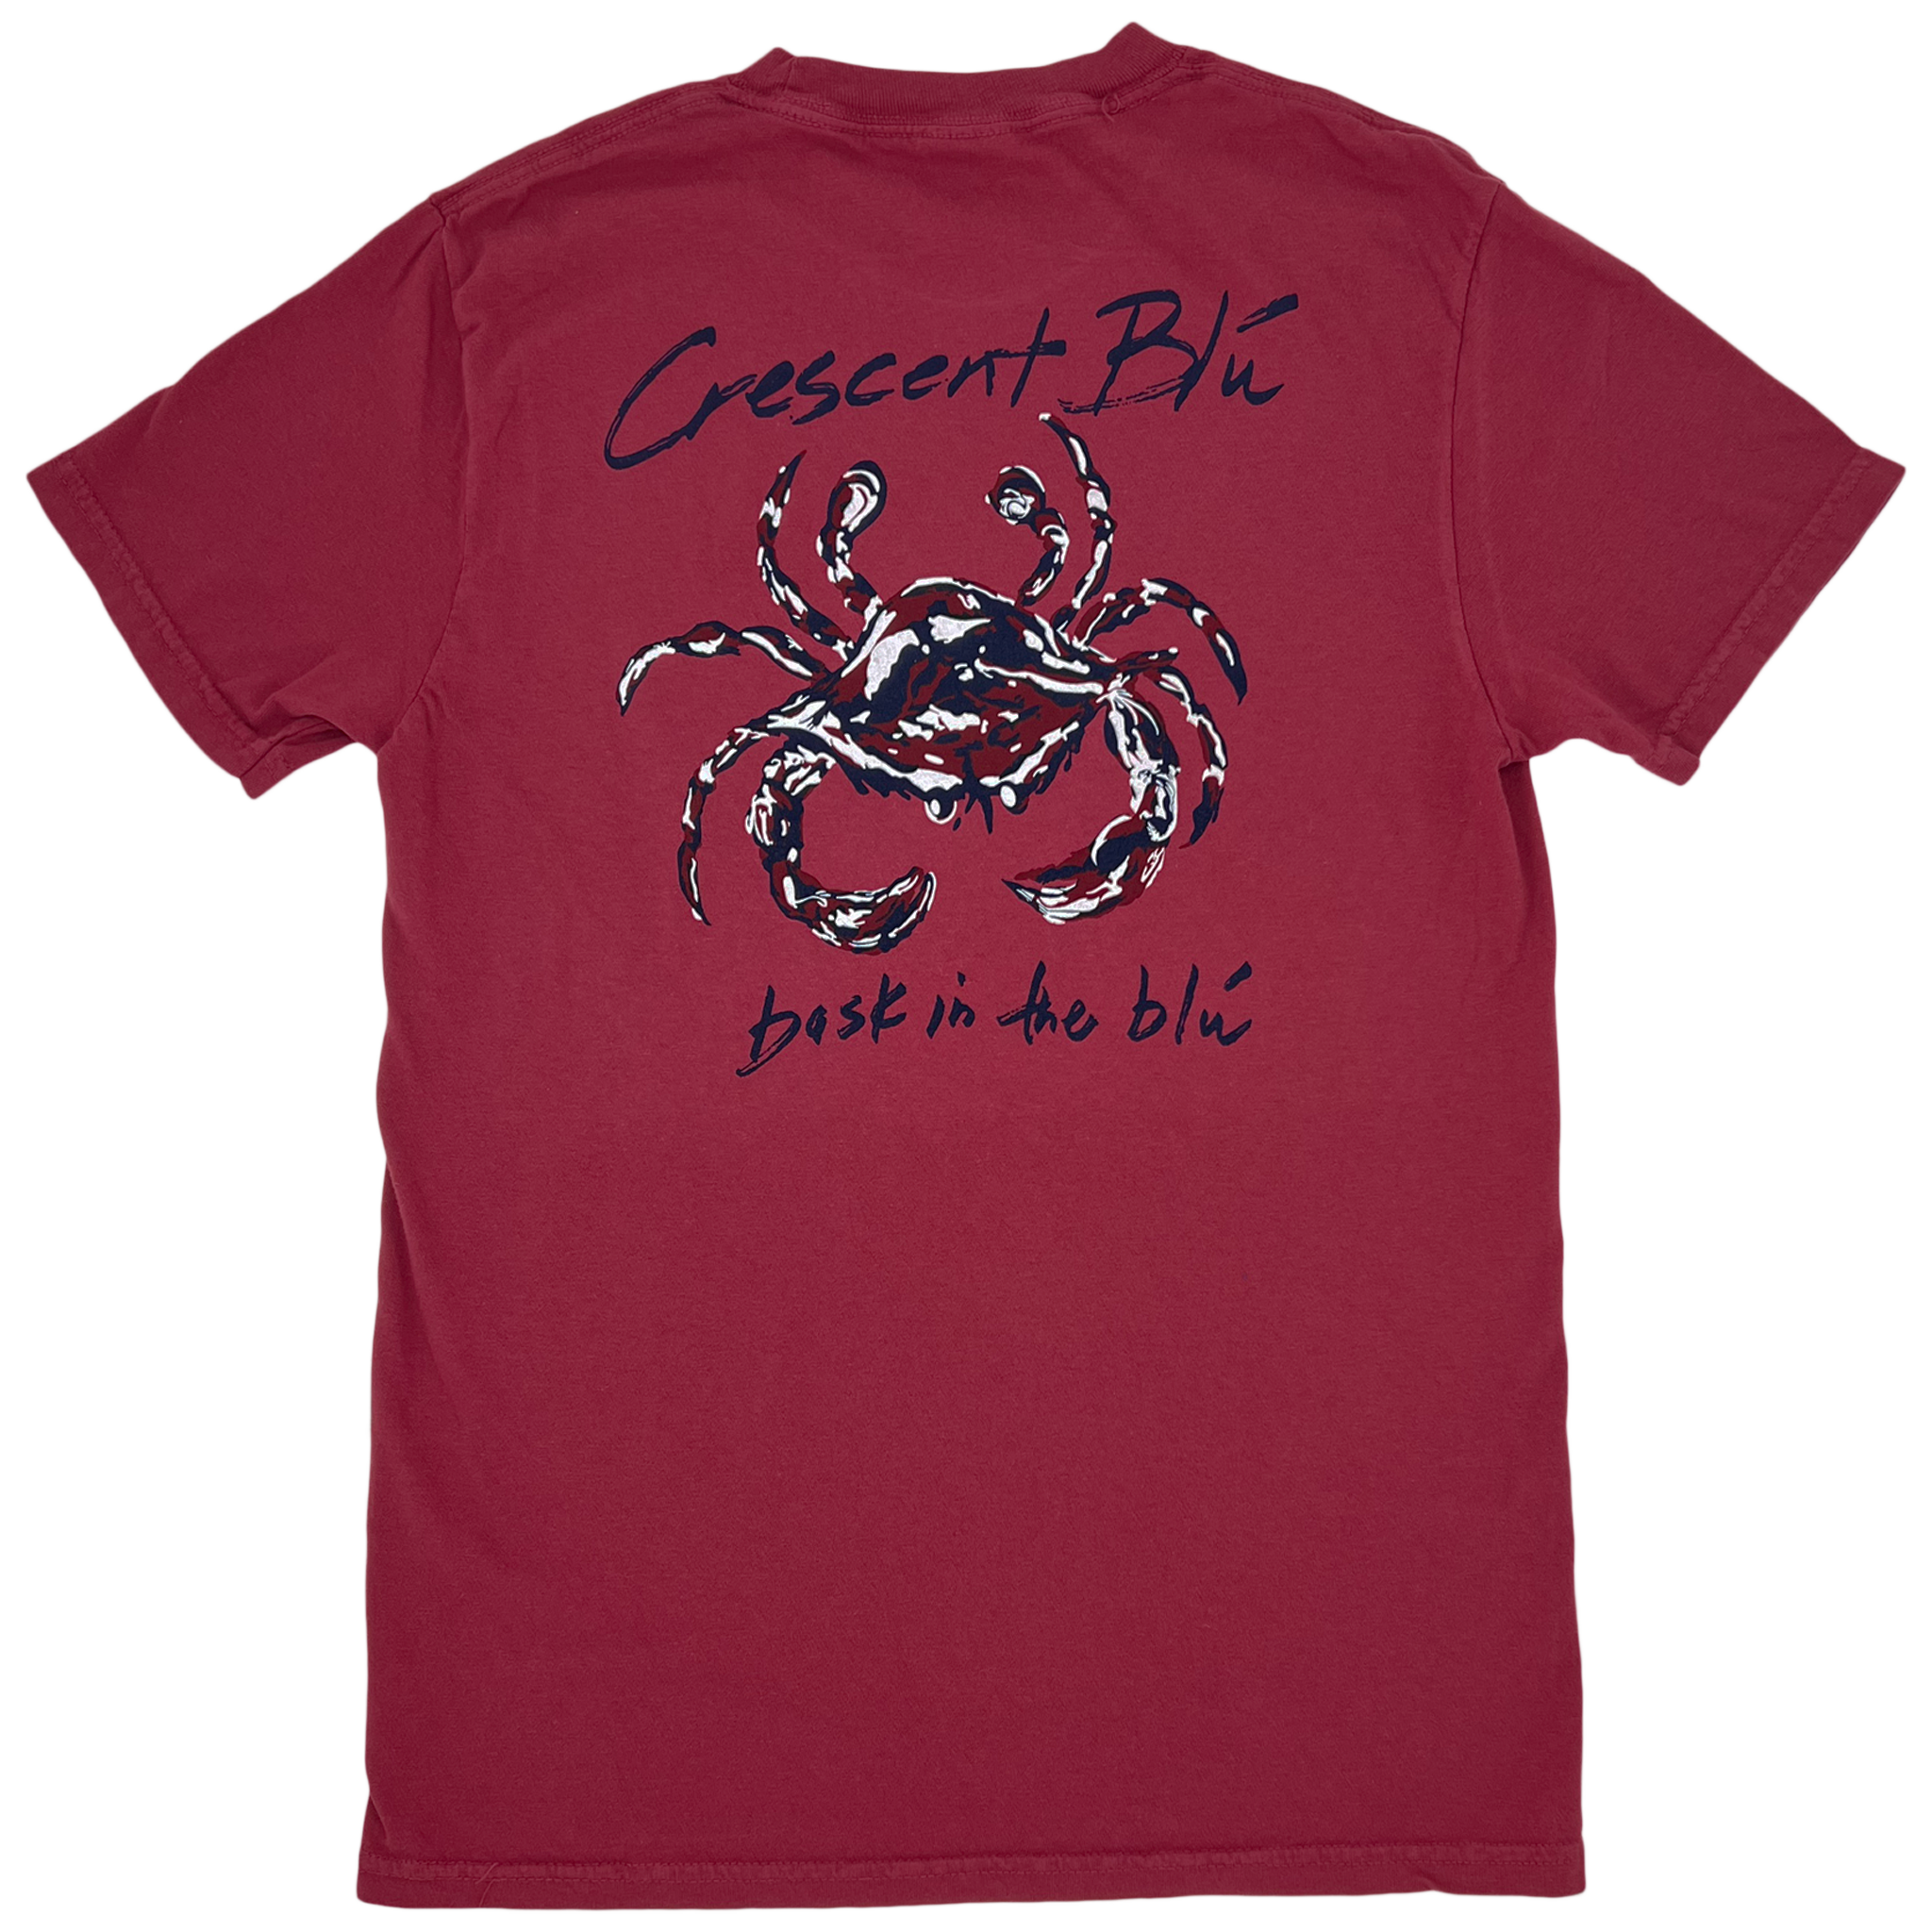 The back of a red t-shirt. Crescent BLú is written above a crimson, navy, and white crab. Bask in the blu is written below the crab.